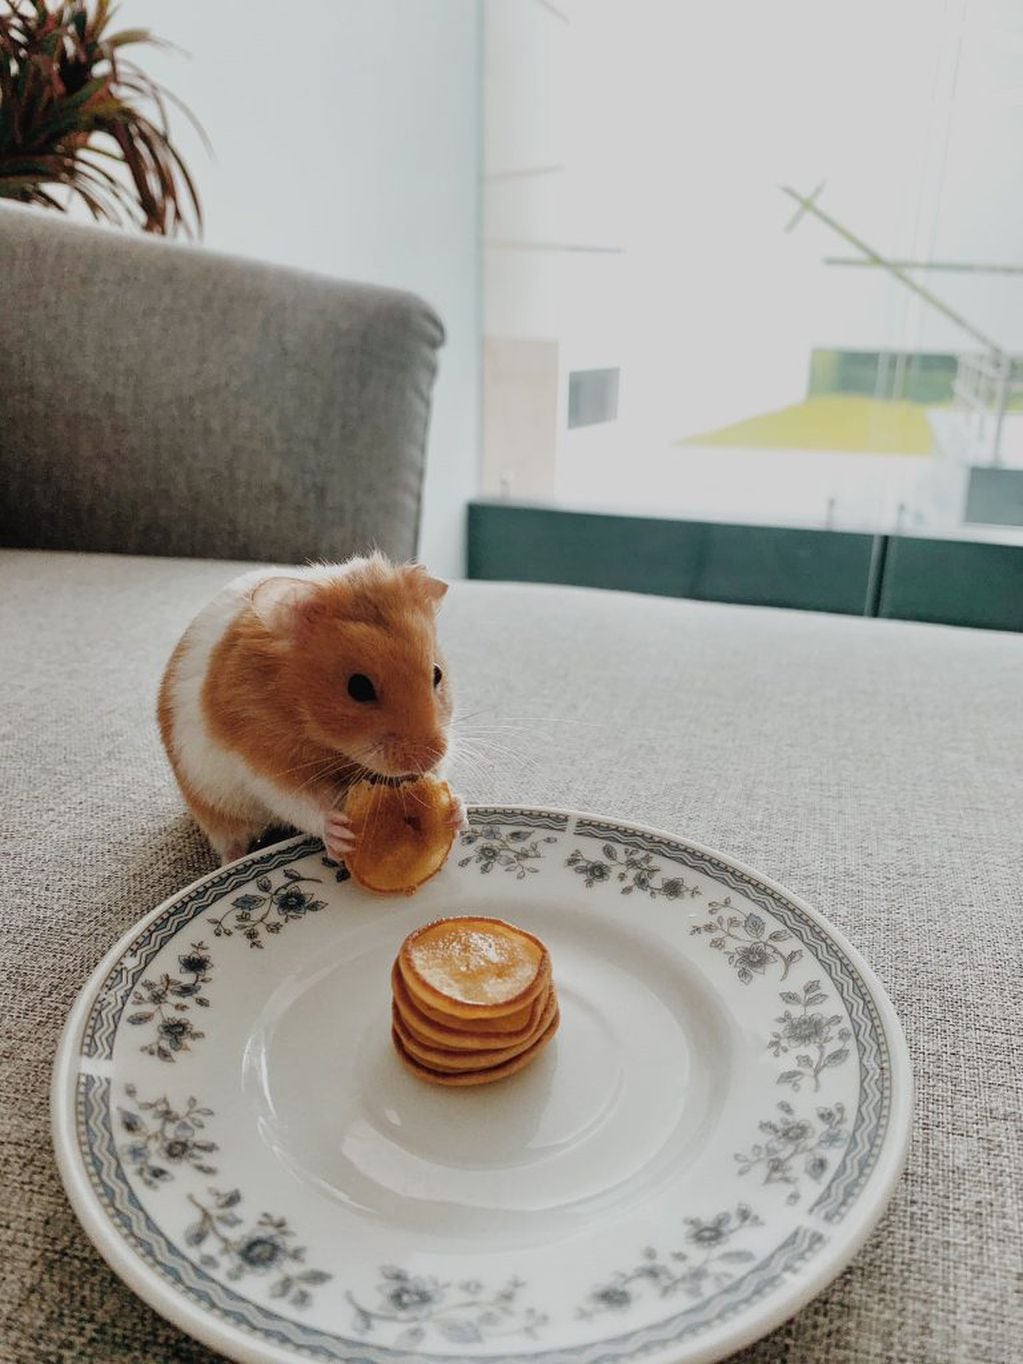 Hamster comiendo panqueques (Twitter/@melanypalma_)